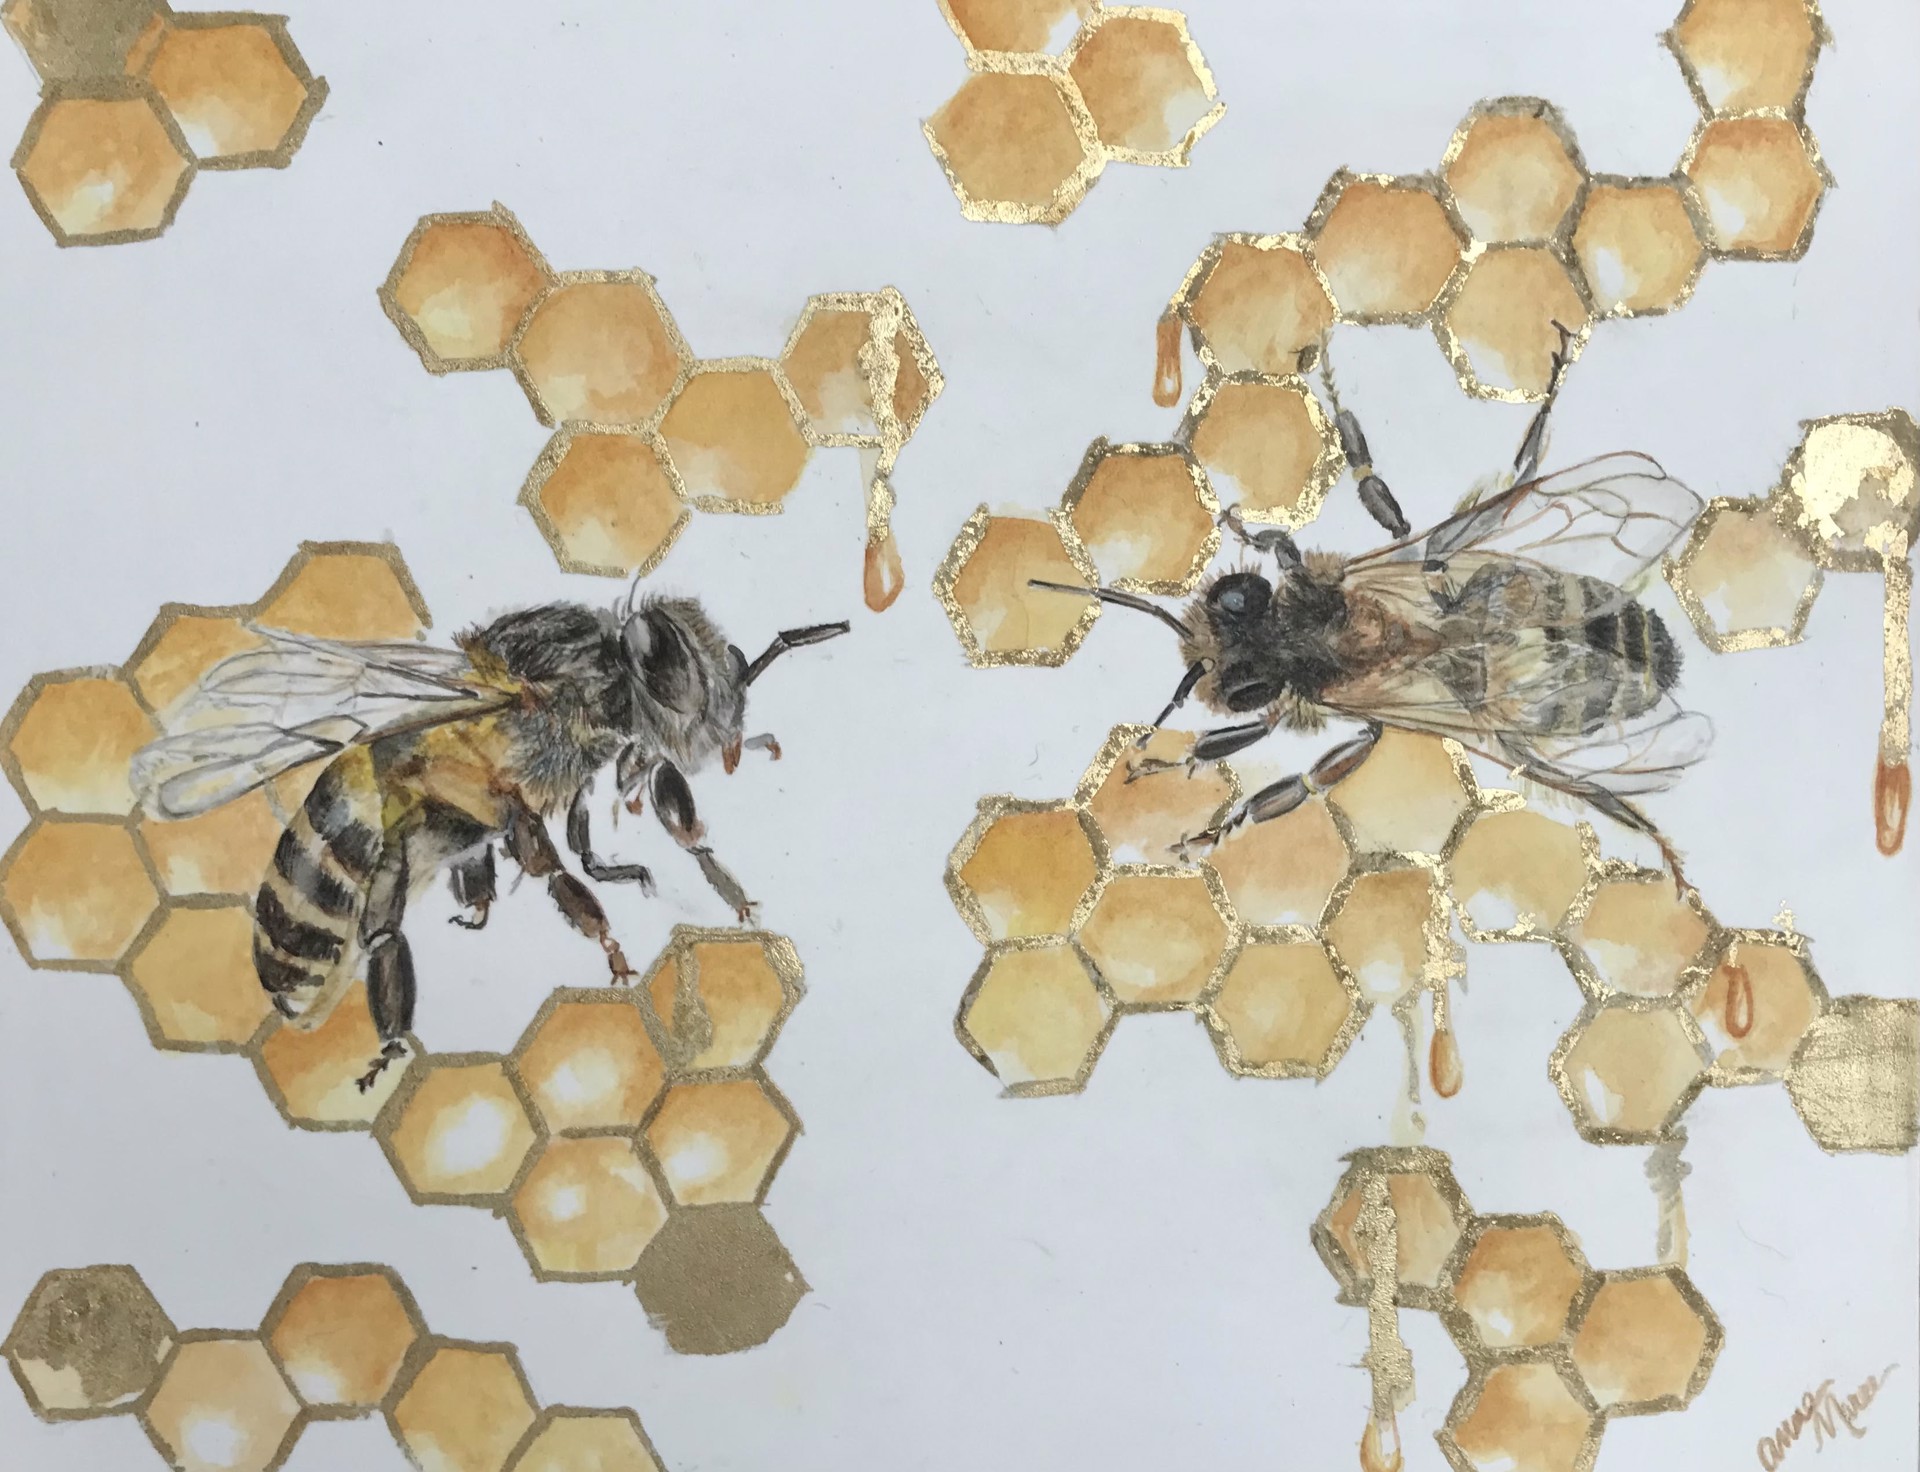 Busy Bees by Anne Maree Lawrence